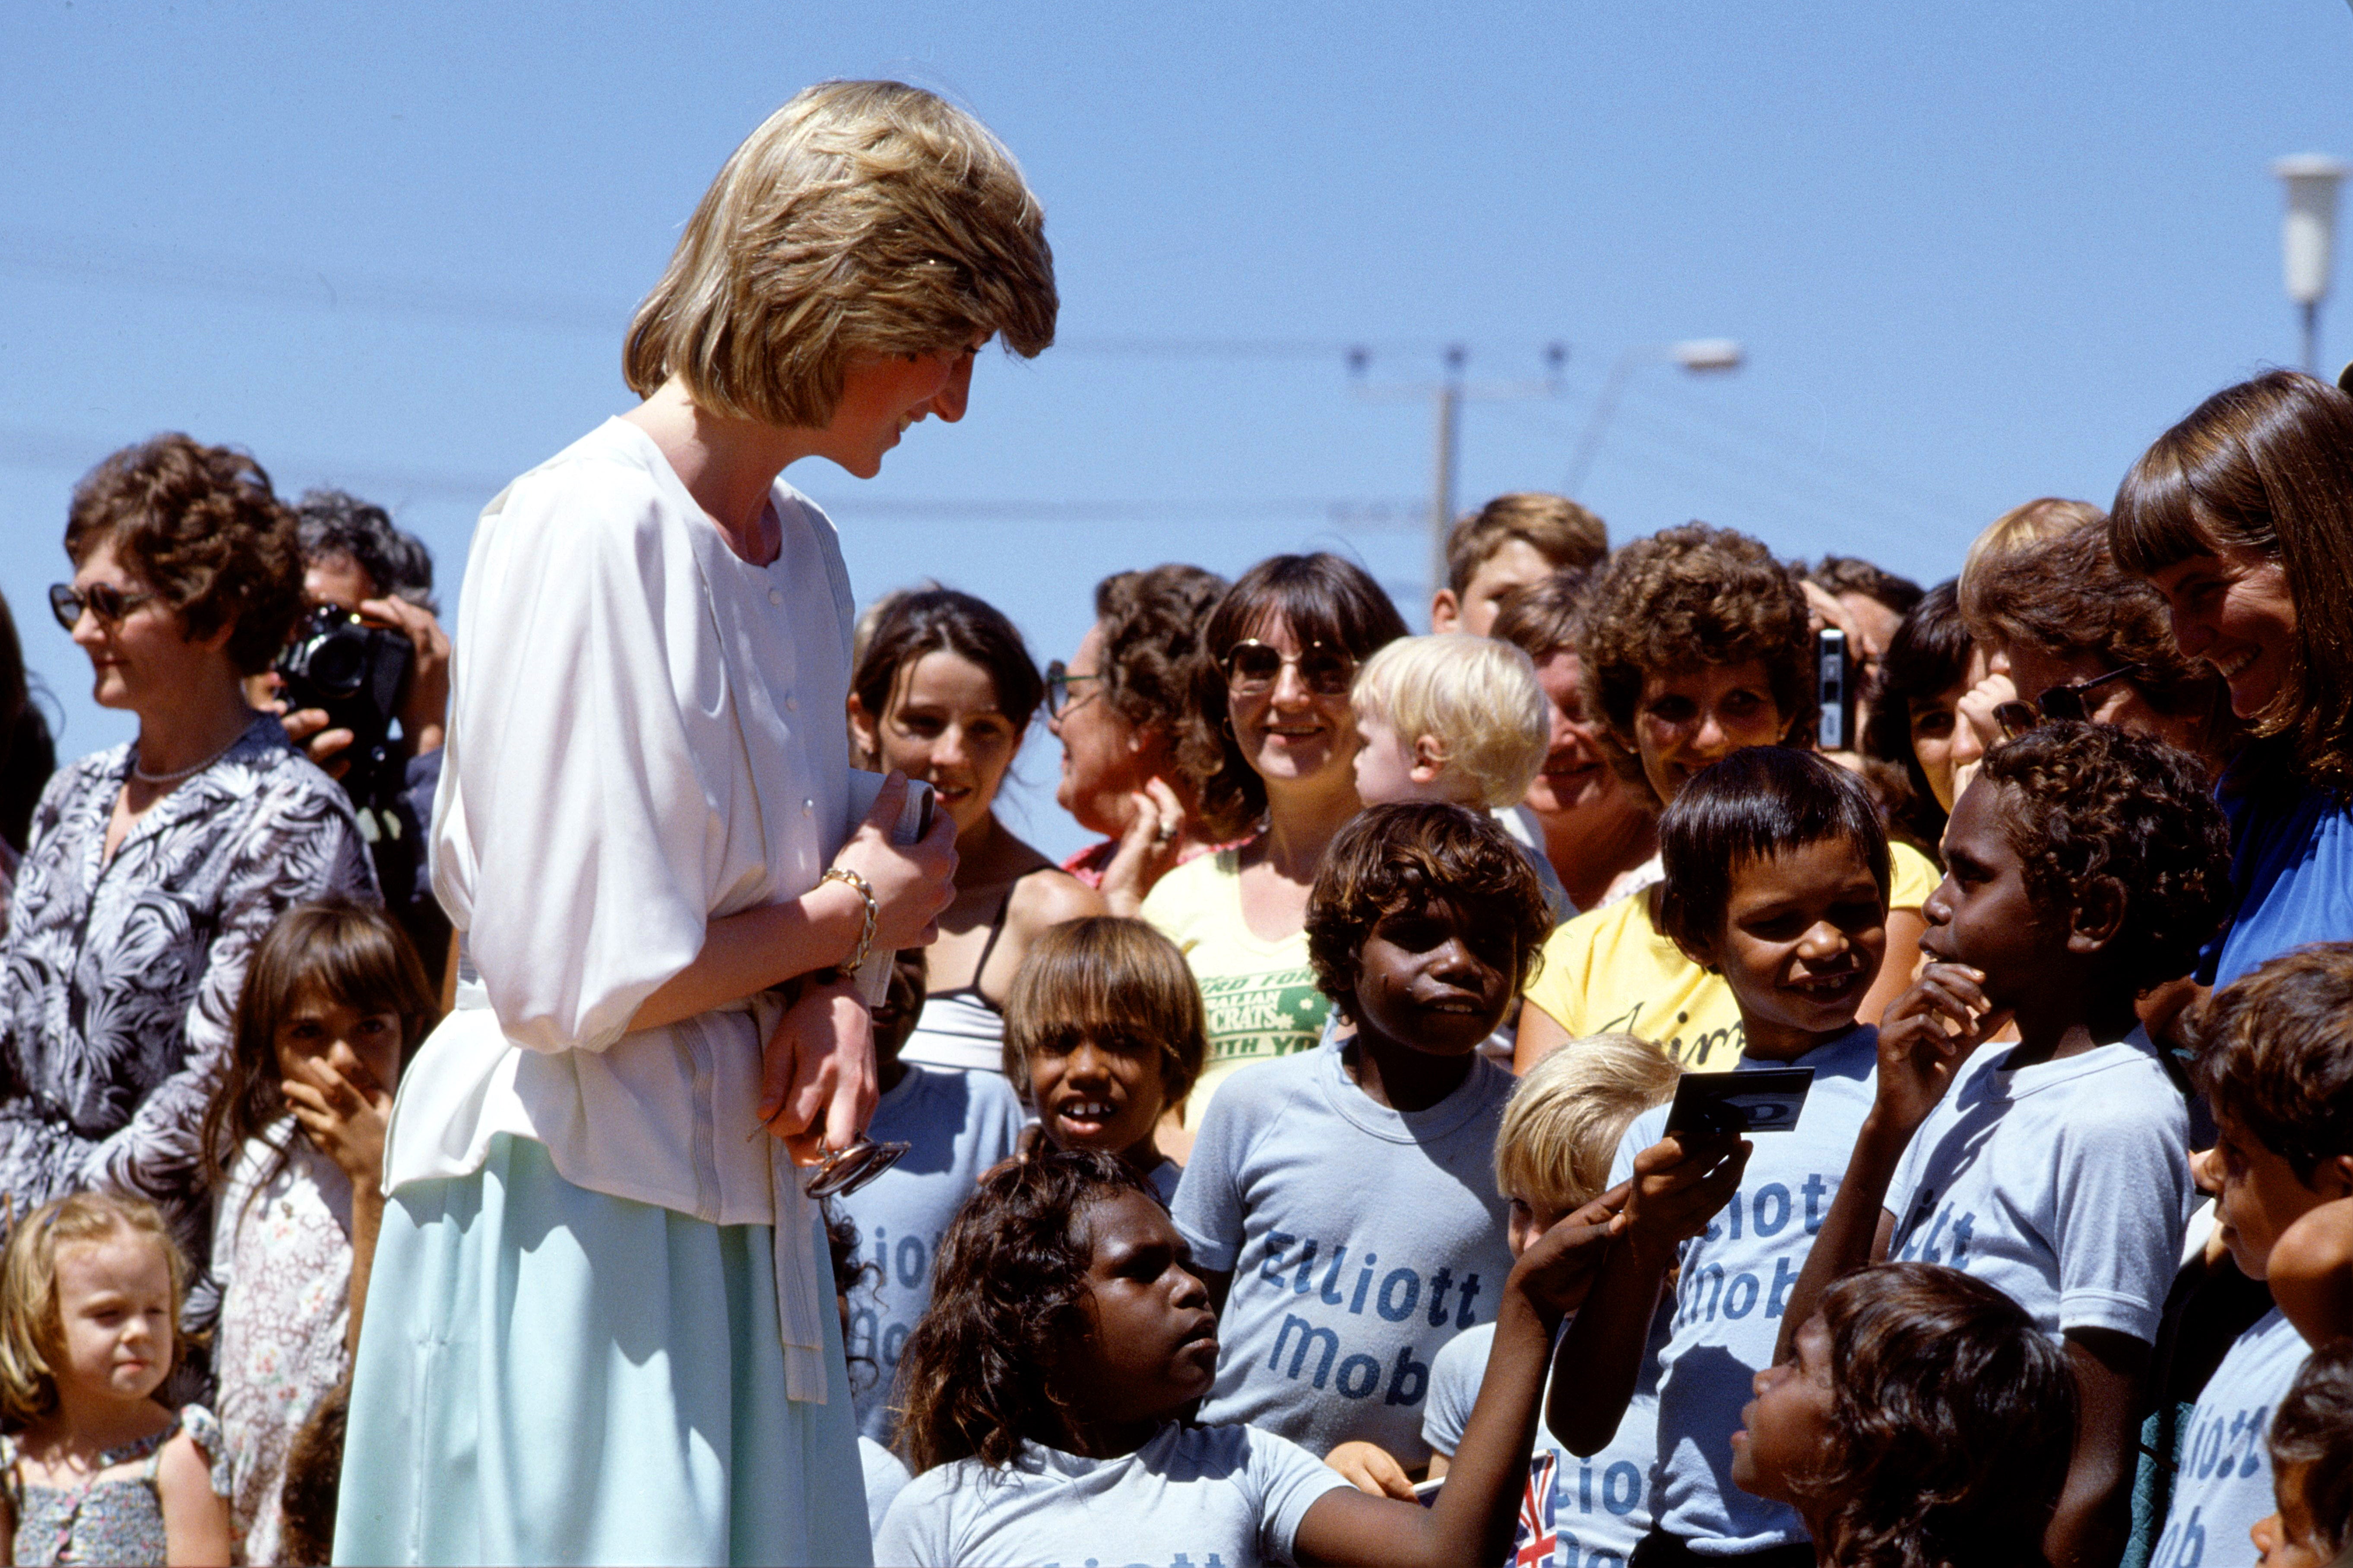 Princess Diana speaking to a group of children during her official tour of Australia with Prince Charles in 1983.